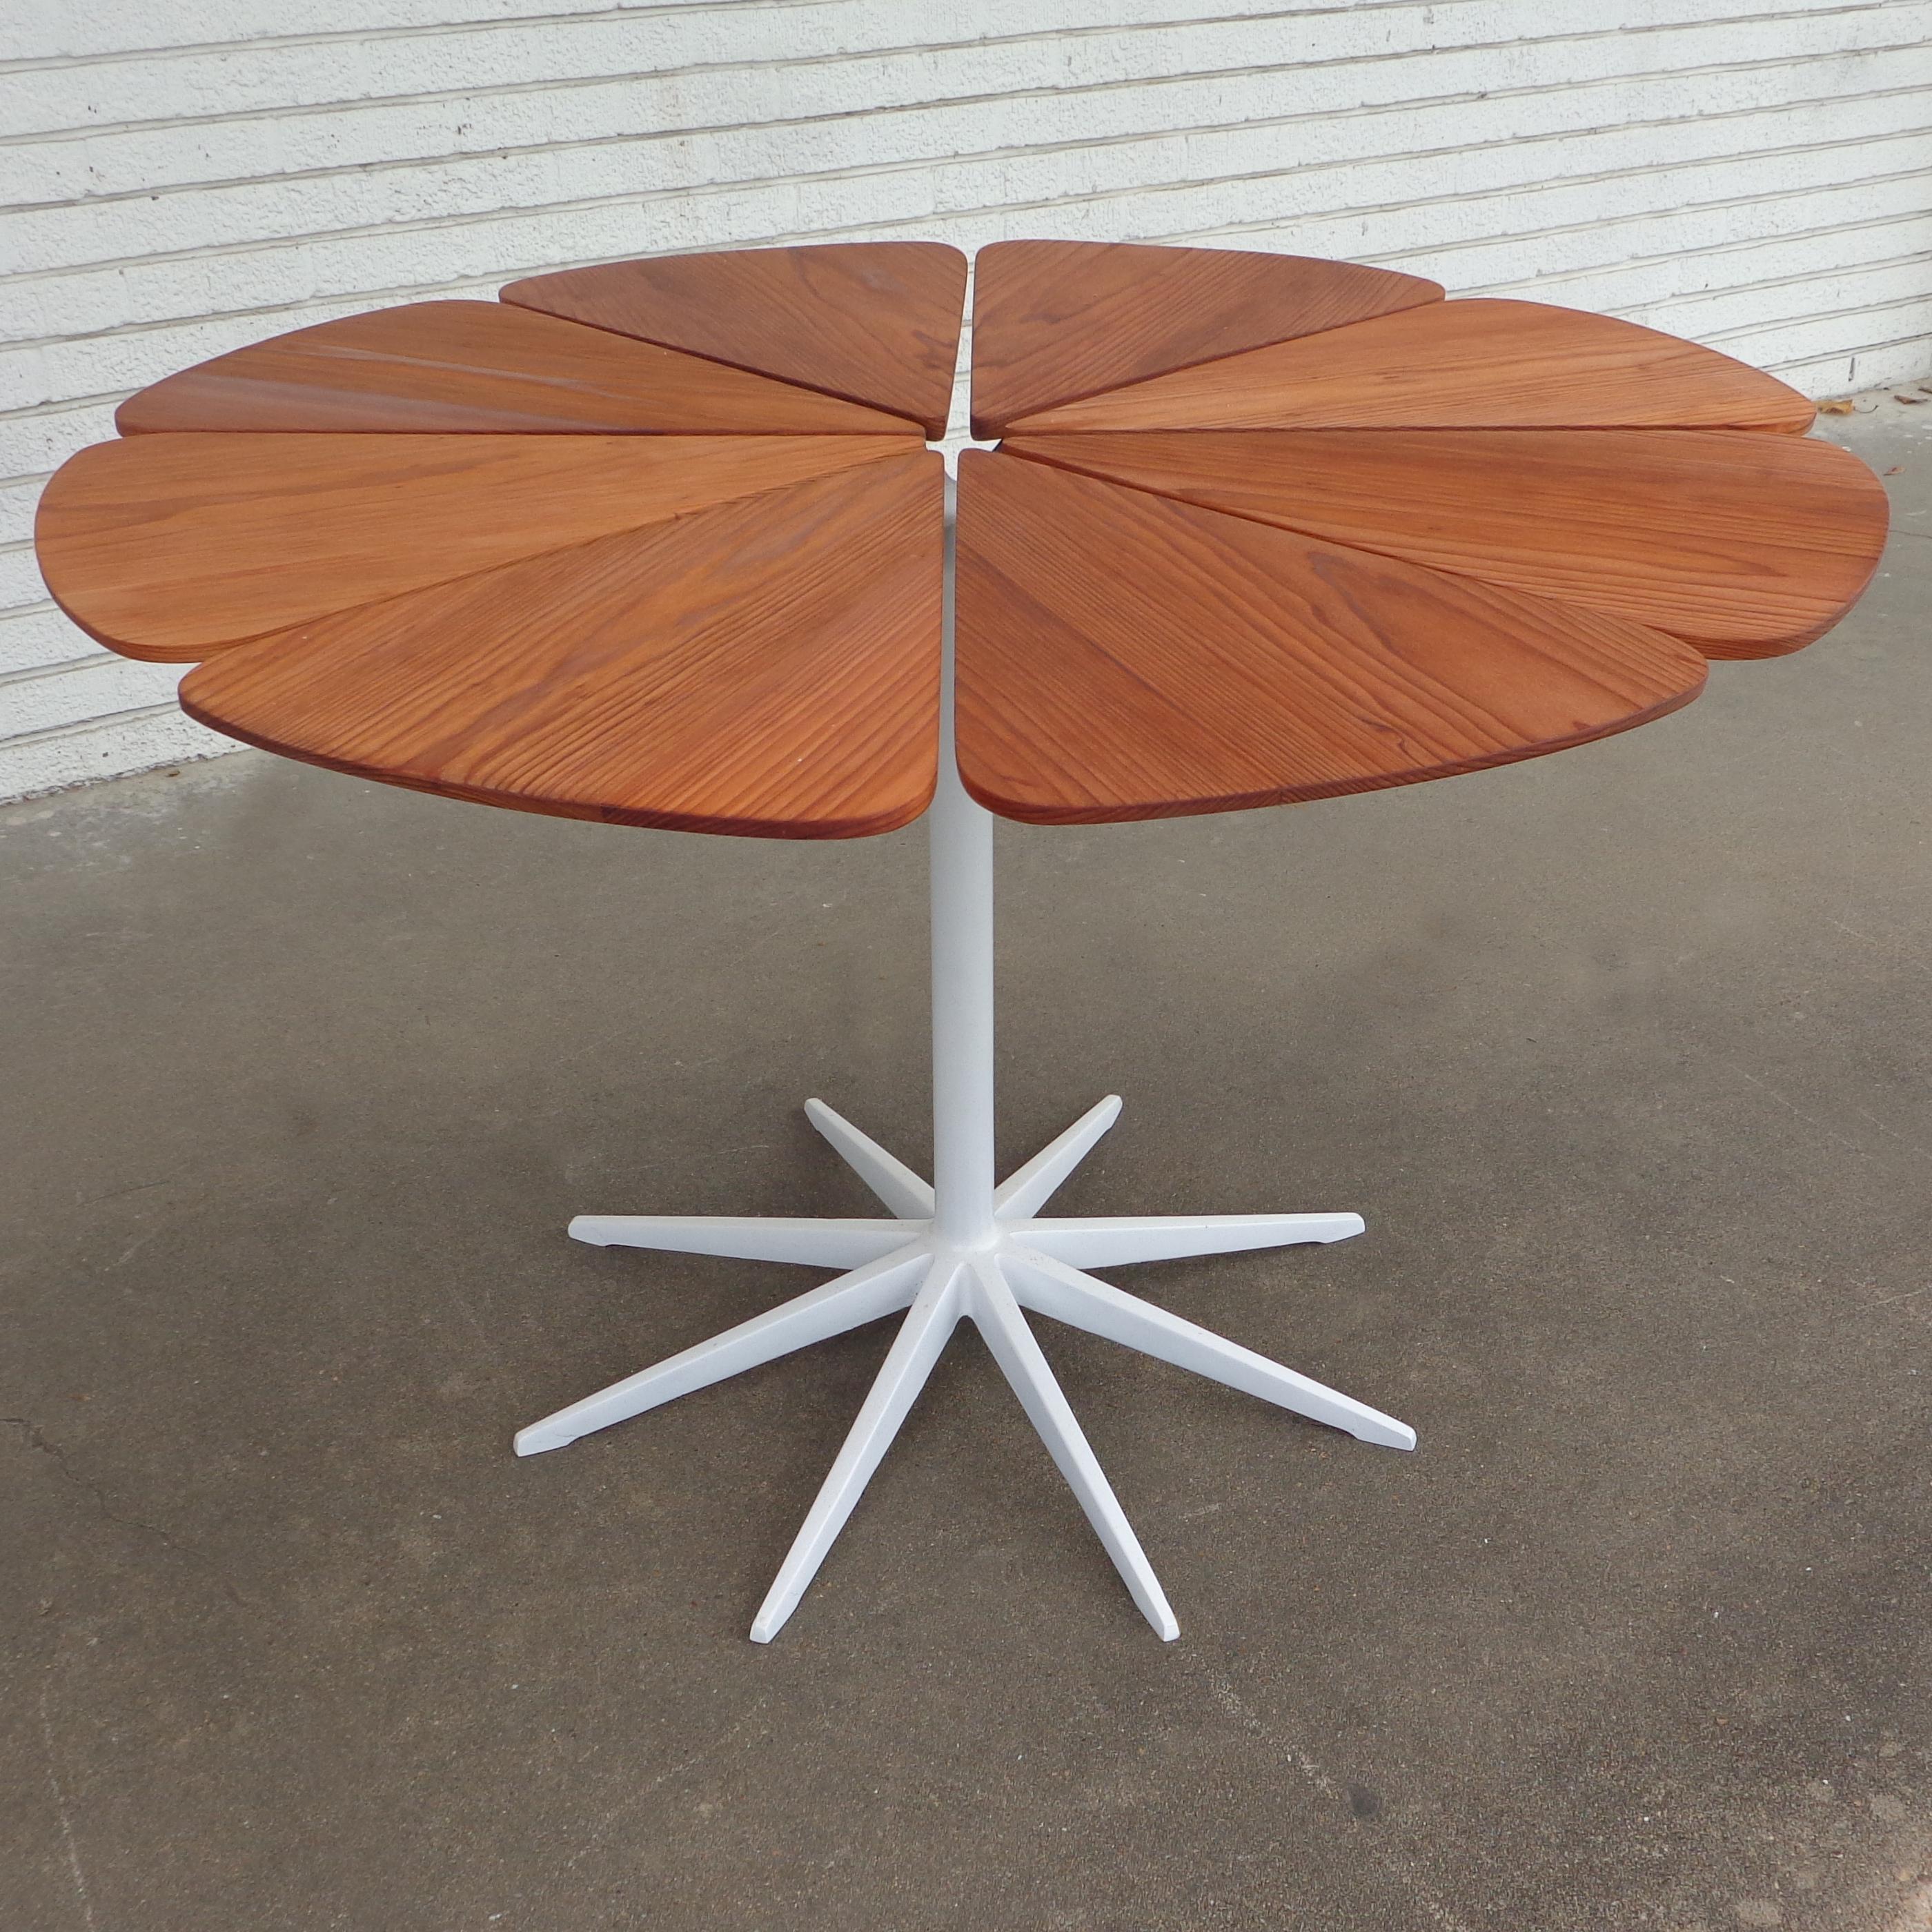 Early Richard Schultz 42 inch Redwood Petal Dining Table

Restored Rare Richard Schultz Petal Dining Table, circa 1960s. Branch-like base supports the eight individual redwood petals that make up the tables surface.   Weather resistant redwood makes